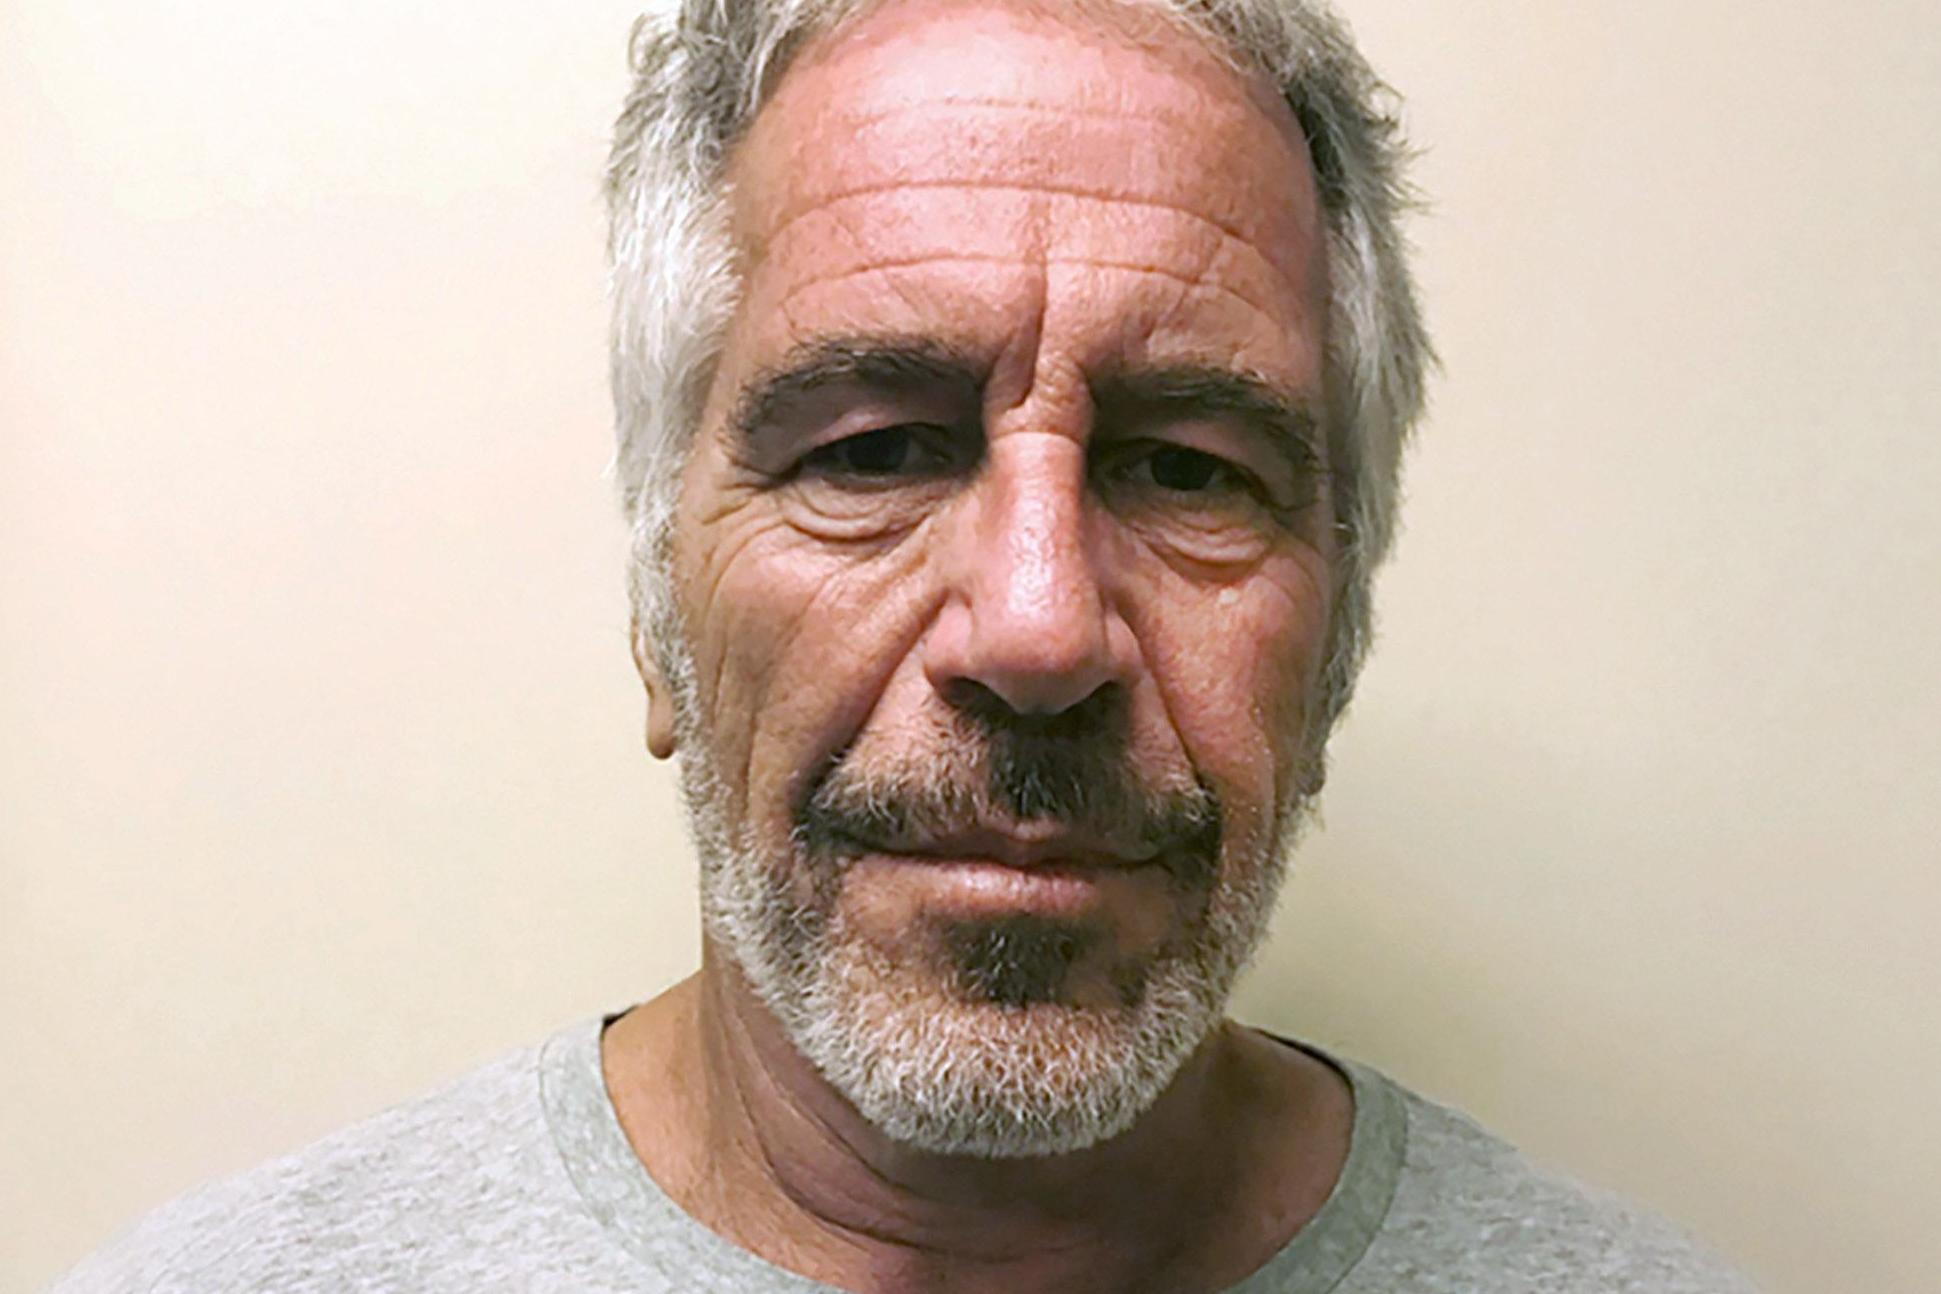 Jeffrey Epstein is the subject of a new documentary by Lifetime.